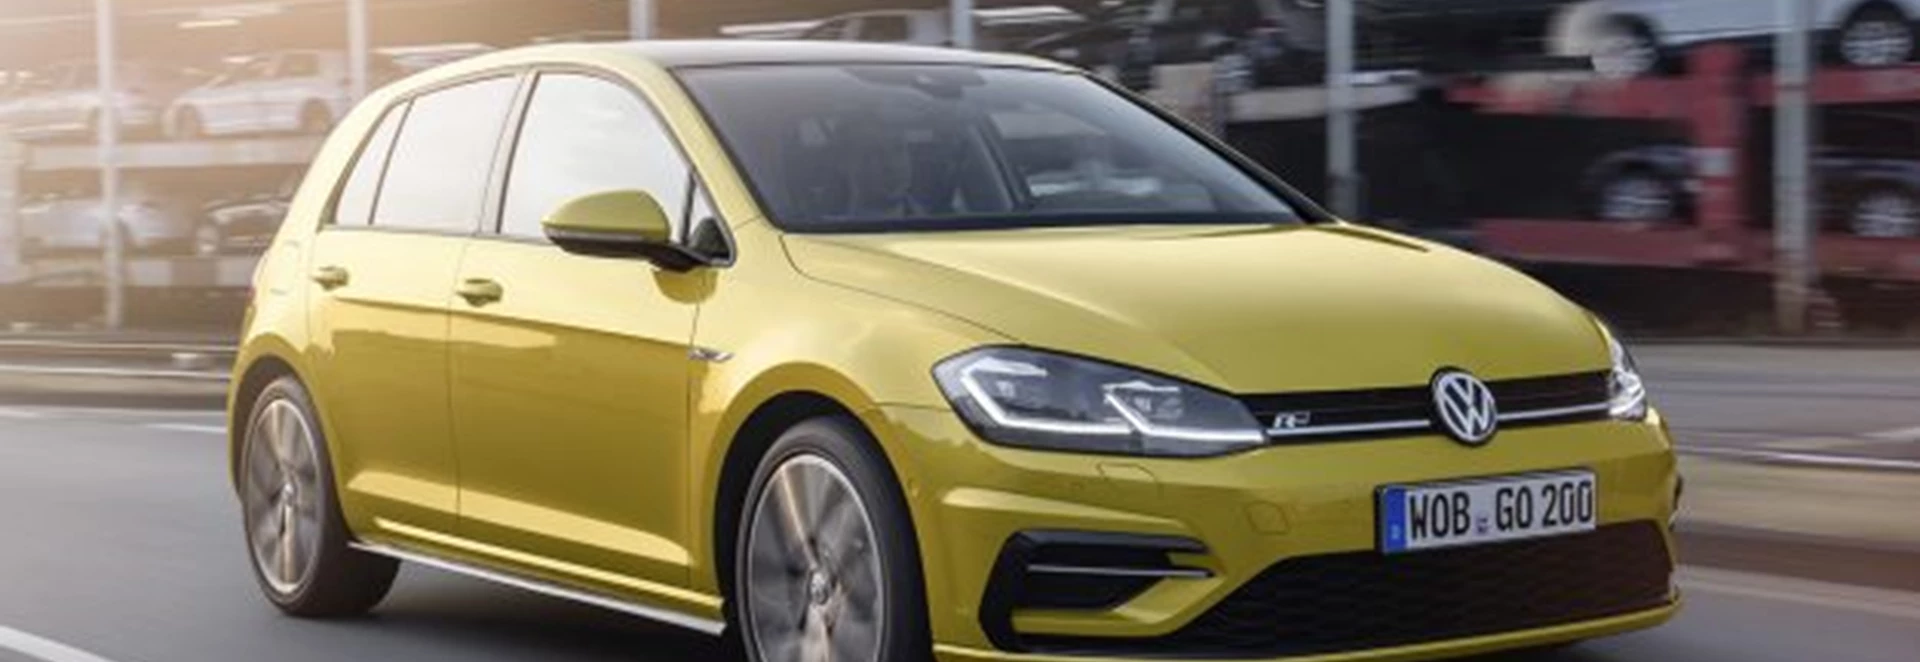 Here’s your first look at the newly facelifted Volkswagen Golf